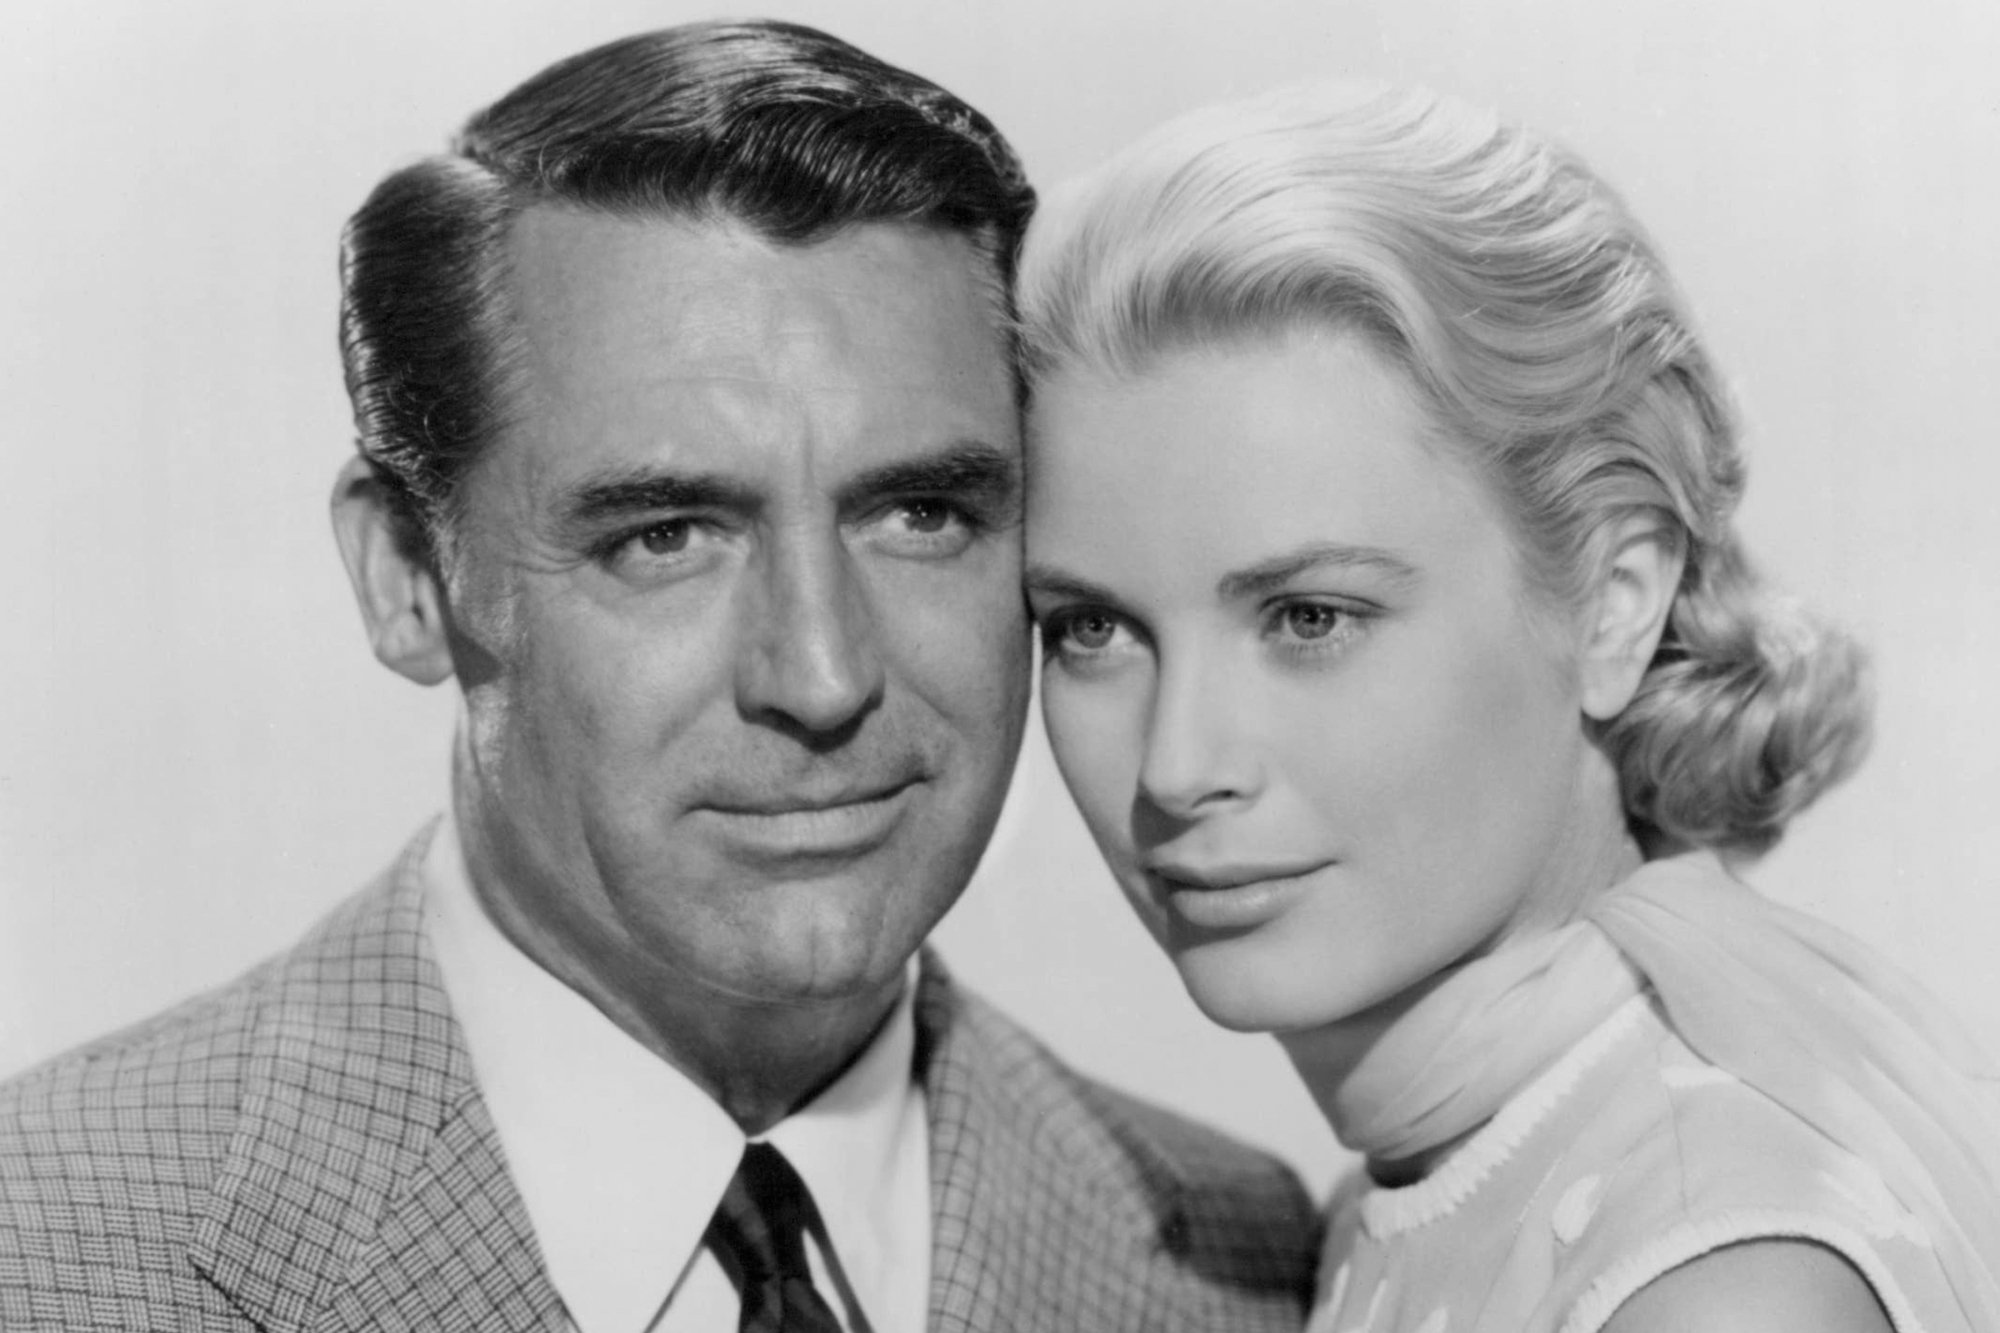 'To Catch a Thief' actors Cary Grant and Grace Kelly in black-and-white. Kelly has her head rested gently against the side of Grant's head.